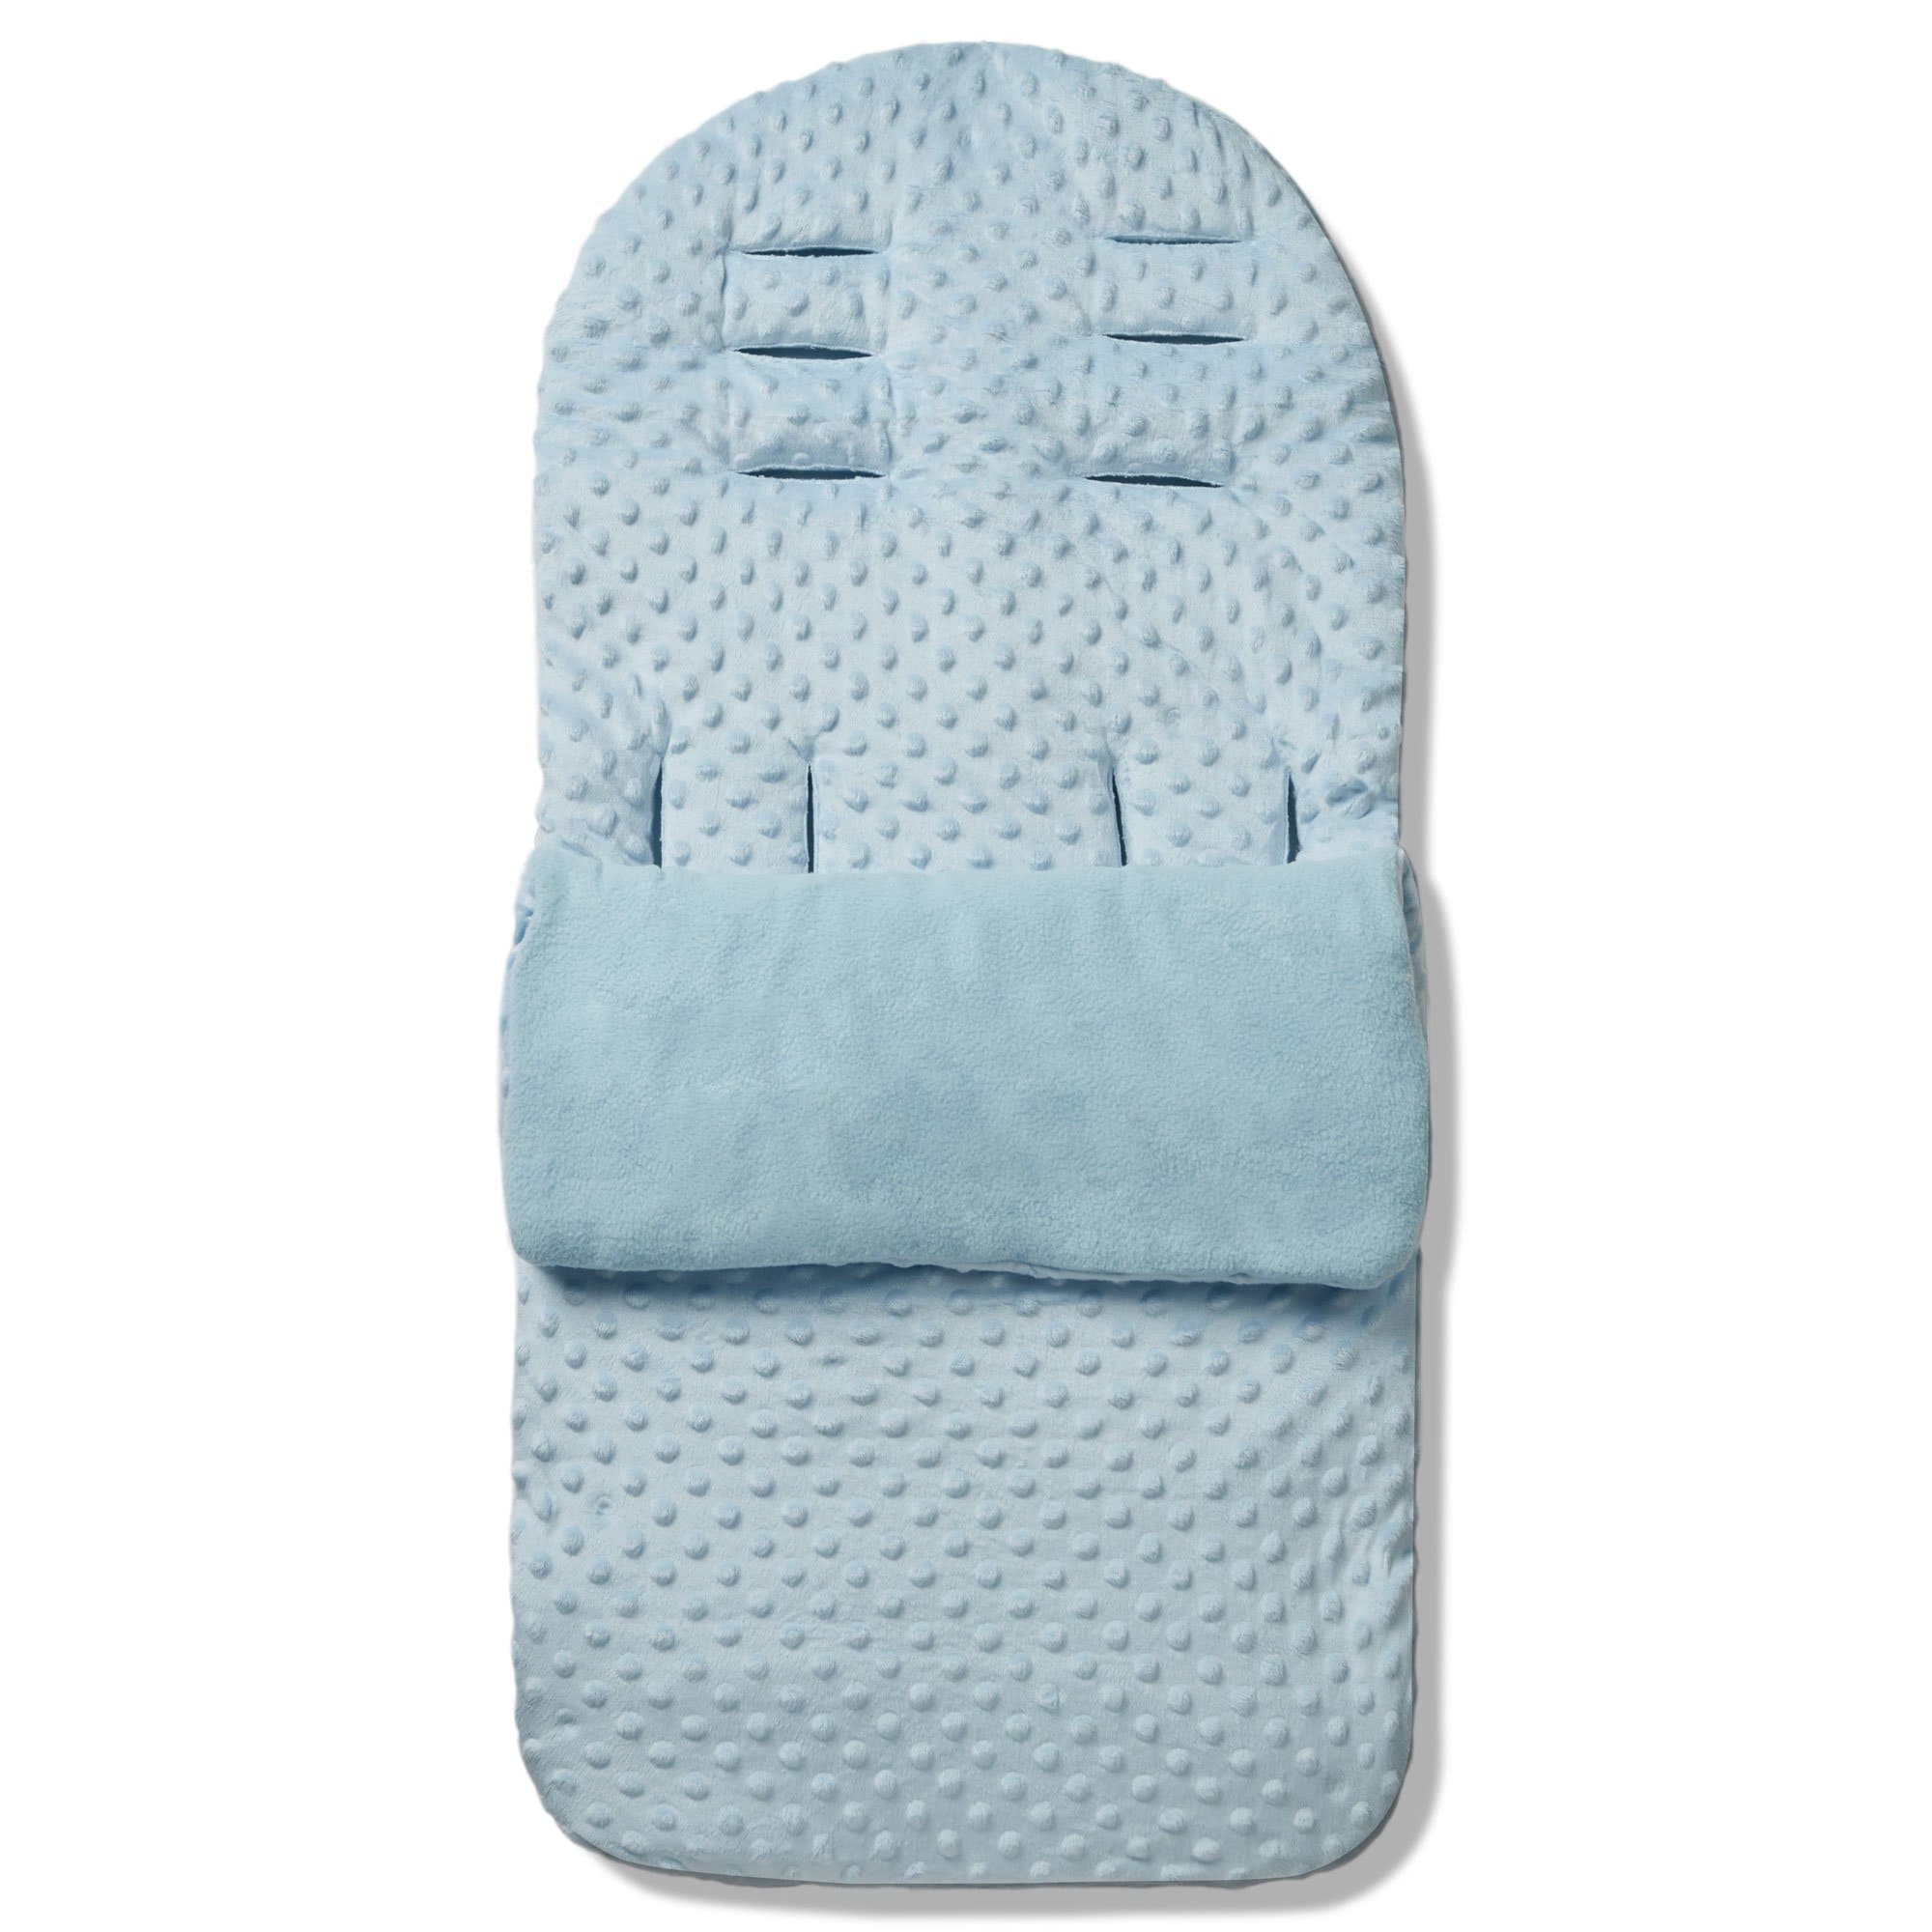 Dimple Footmuff / Cosy Toes Compatible with Maclaren - Blue / Fits All Models | For Your Little One